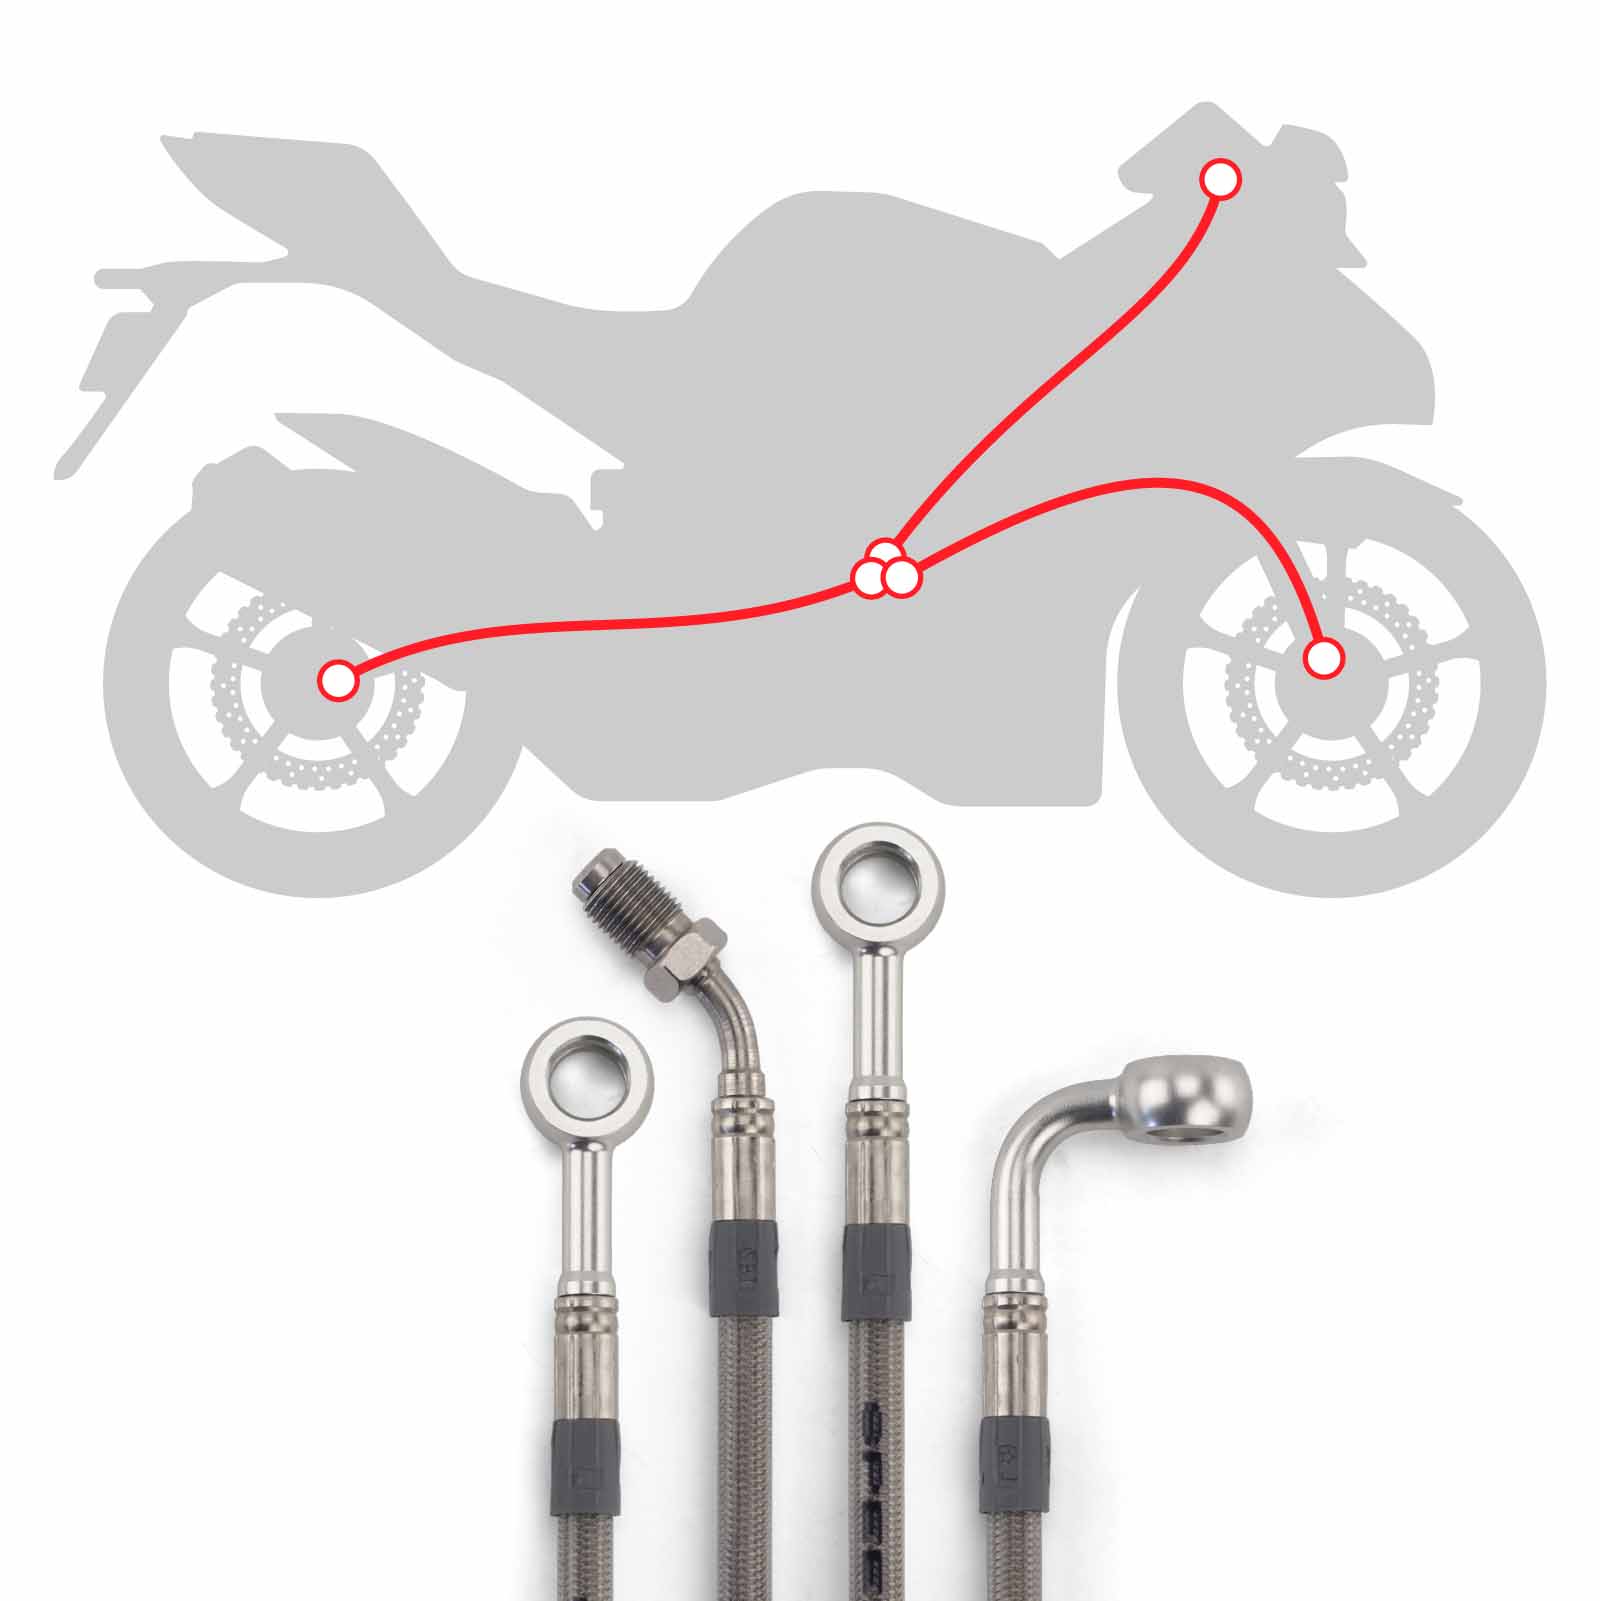 Raximo steel braided brake hose kit front and rear cpl....